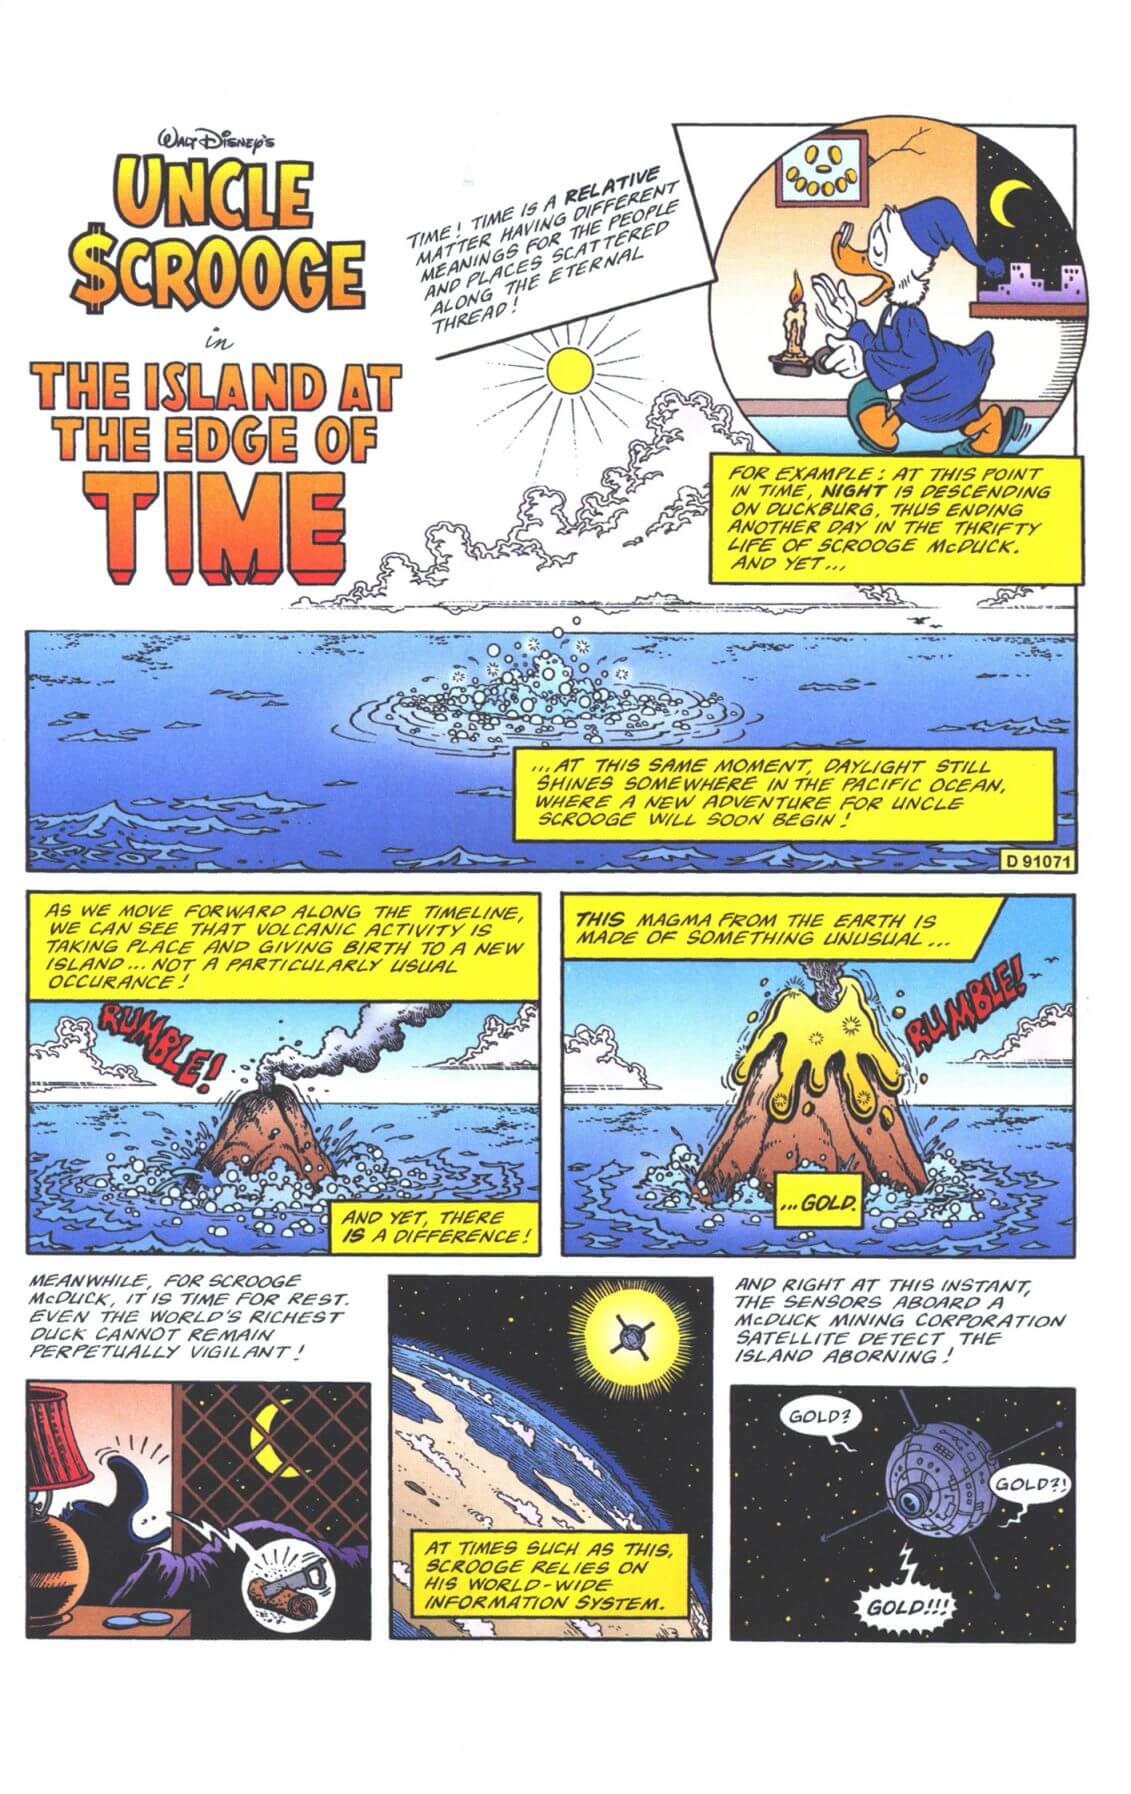 The Island at the Edge of Time first page